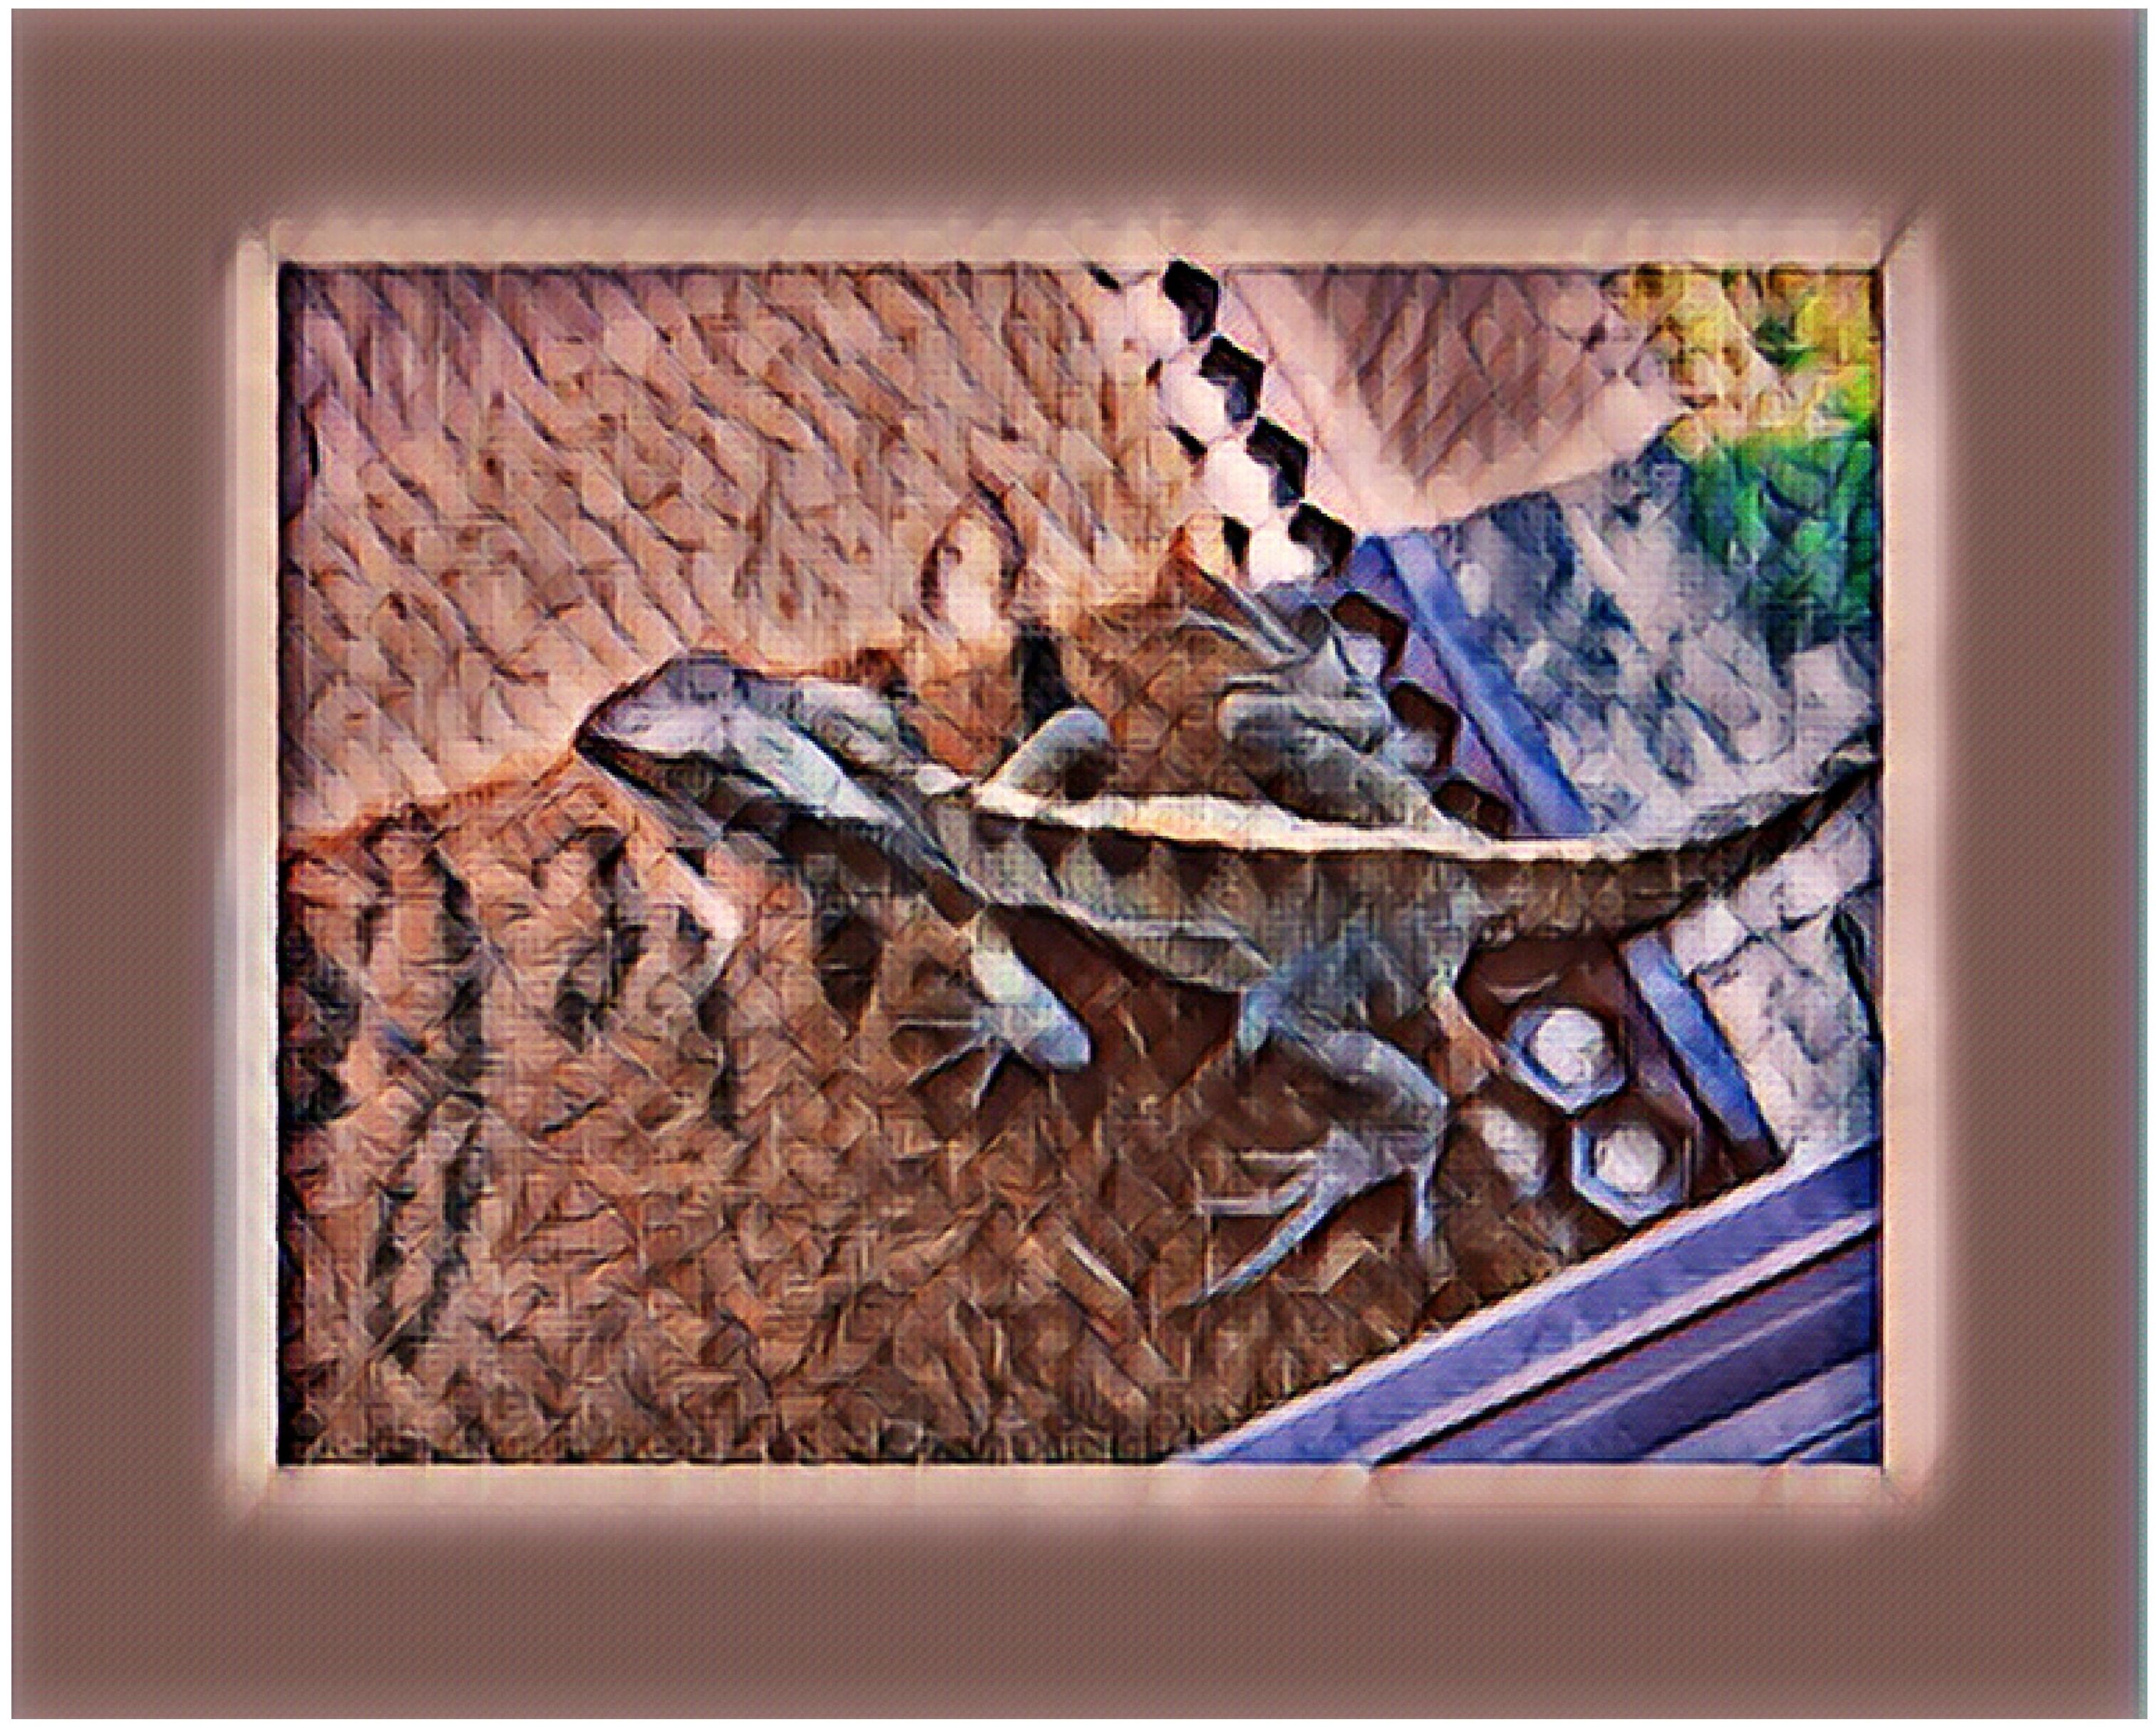 A framed water dragon, hanging on an internal wall, in the Space